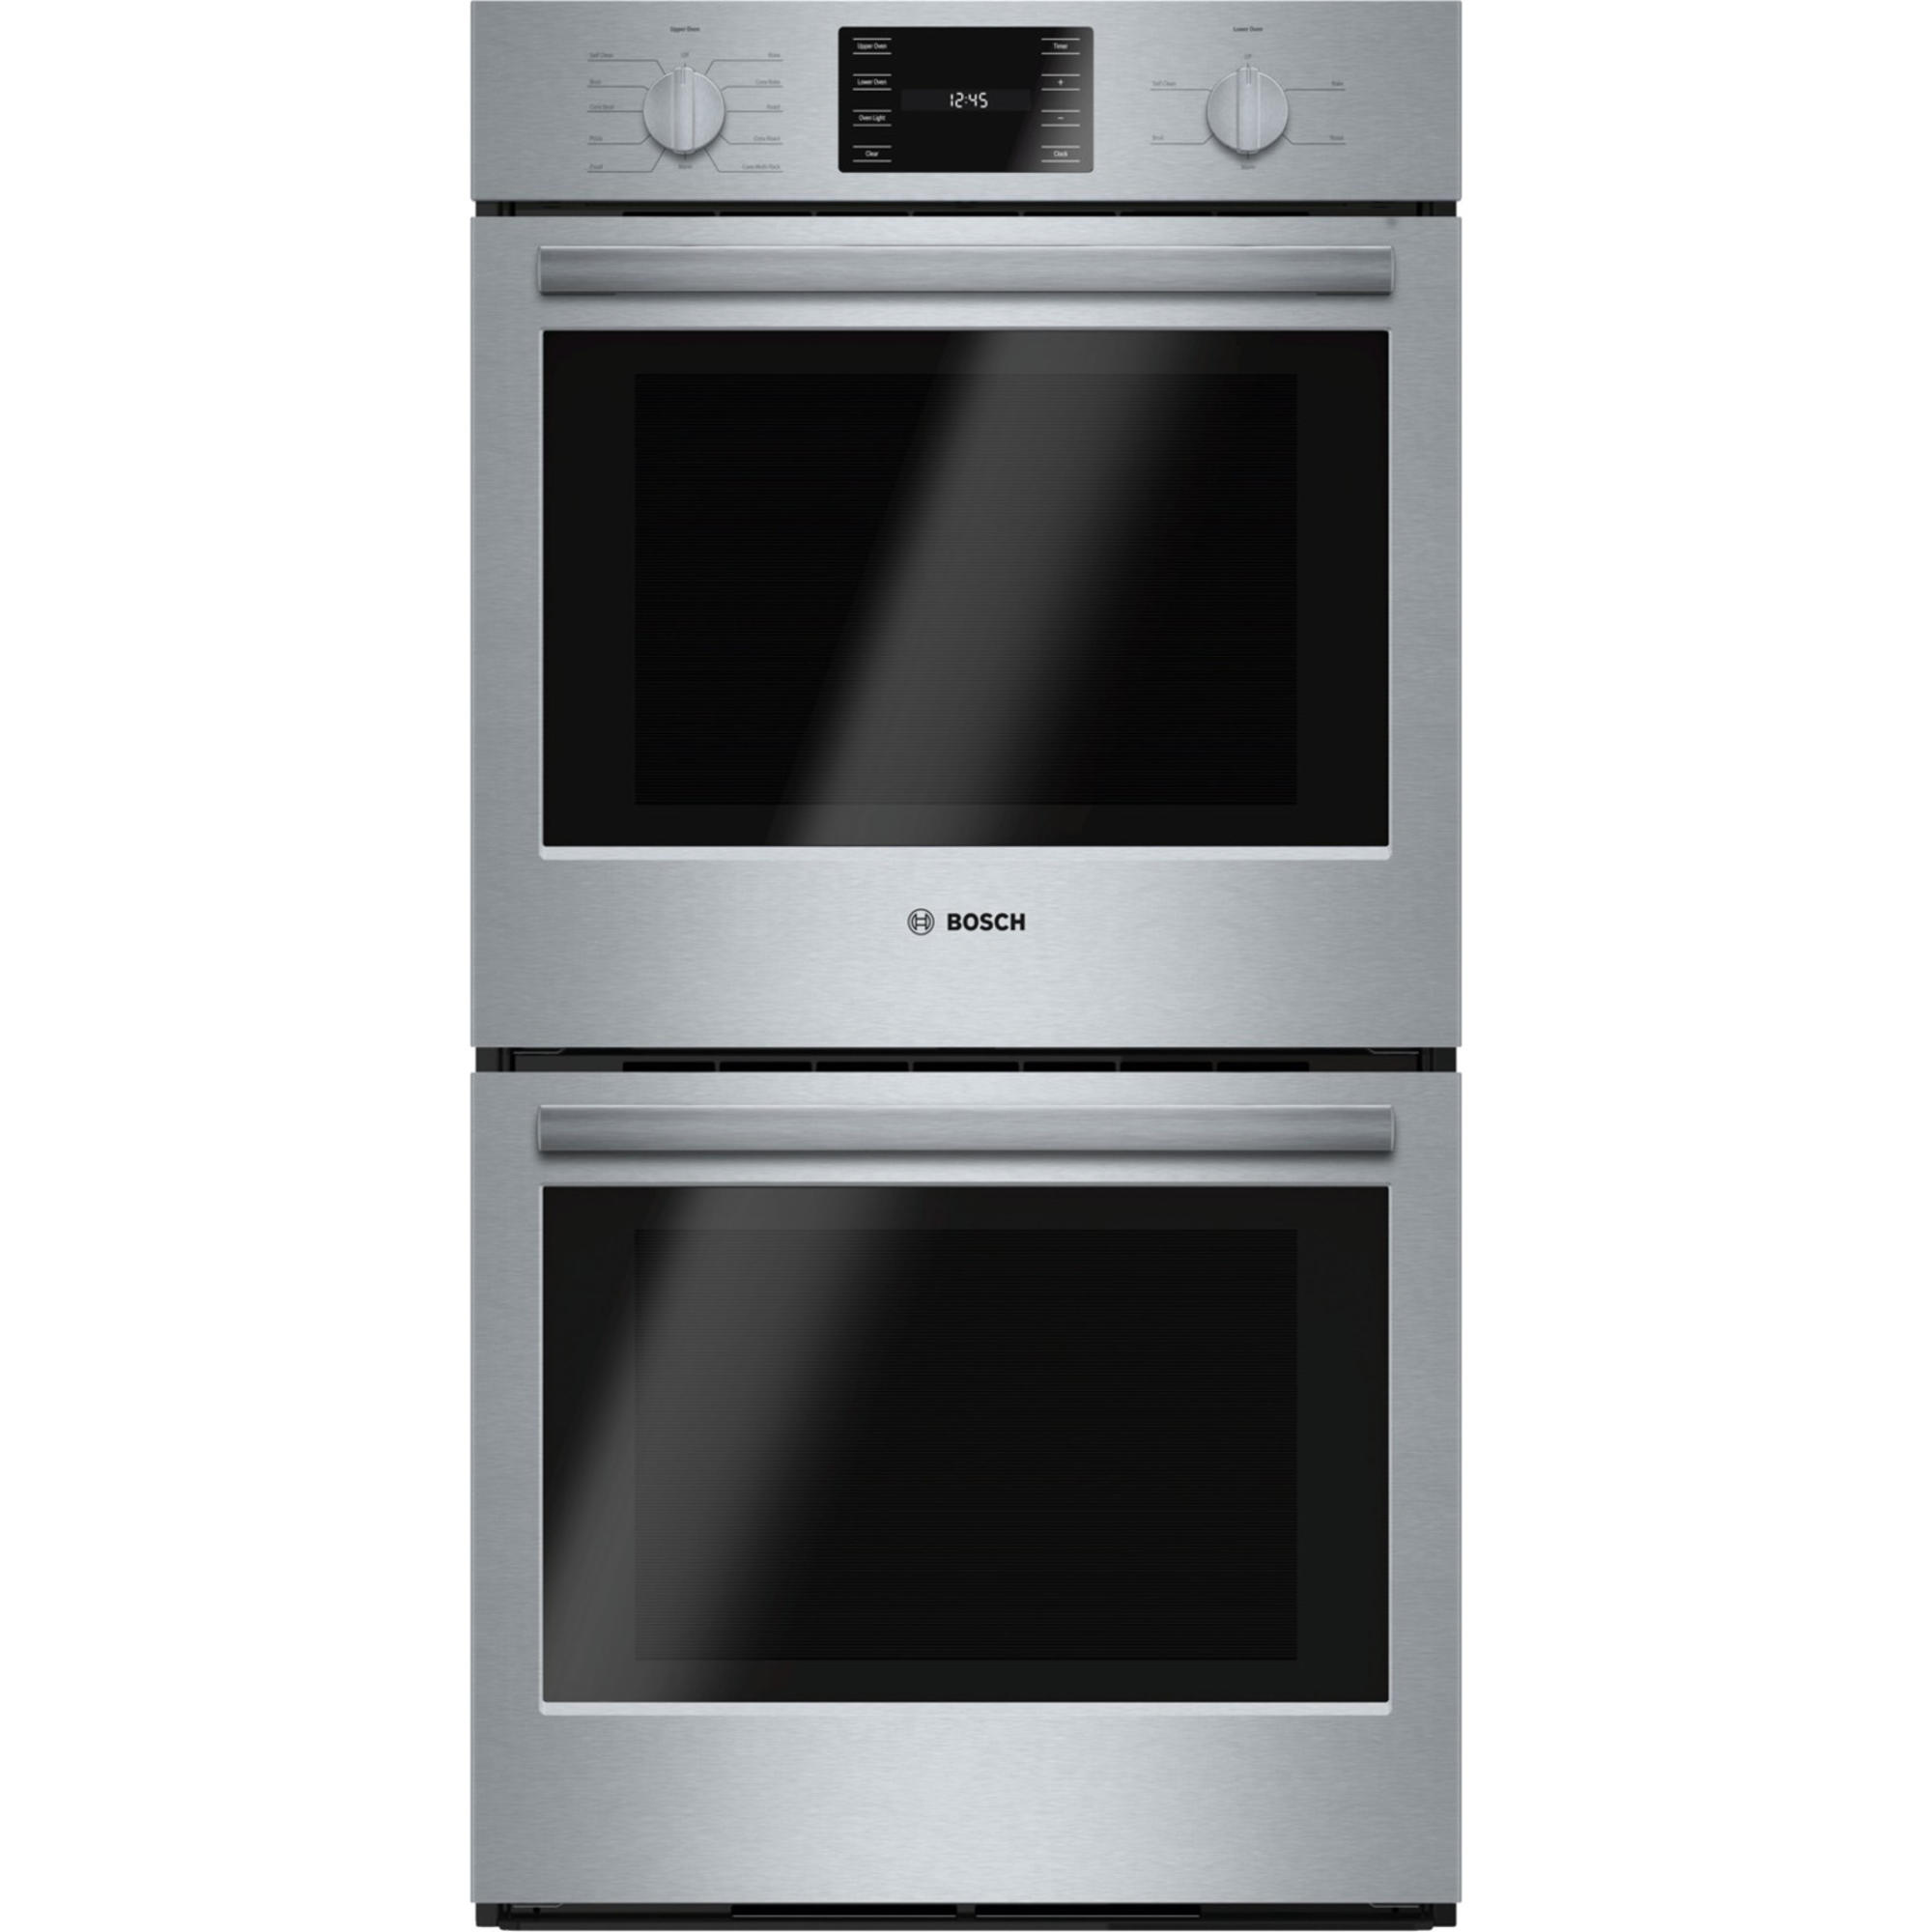 0825225907046 - HBN5651UC 27 500 SERIES DOUBLE WALL OVEN W/ CONVECTION - STAINLESS STEEL